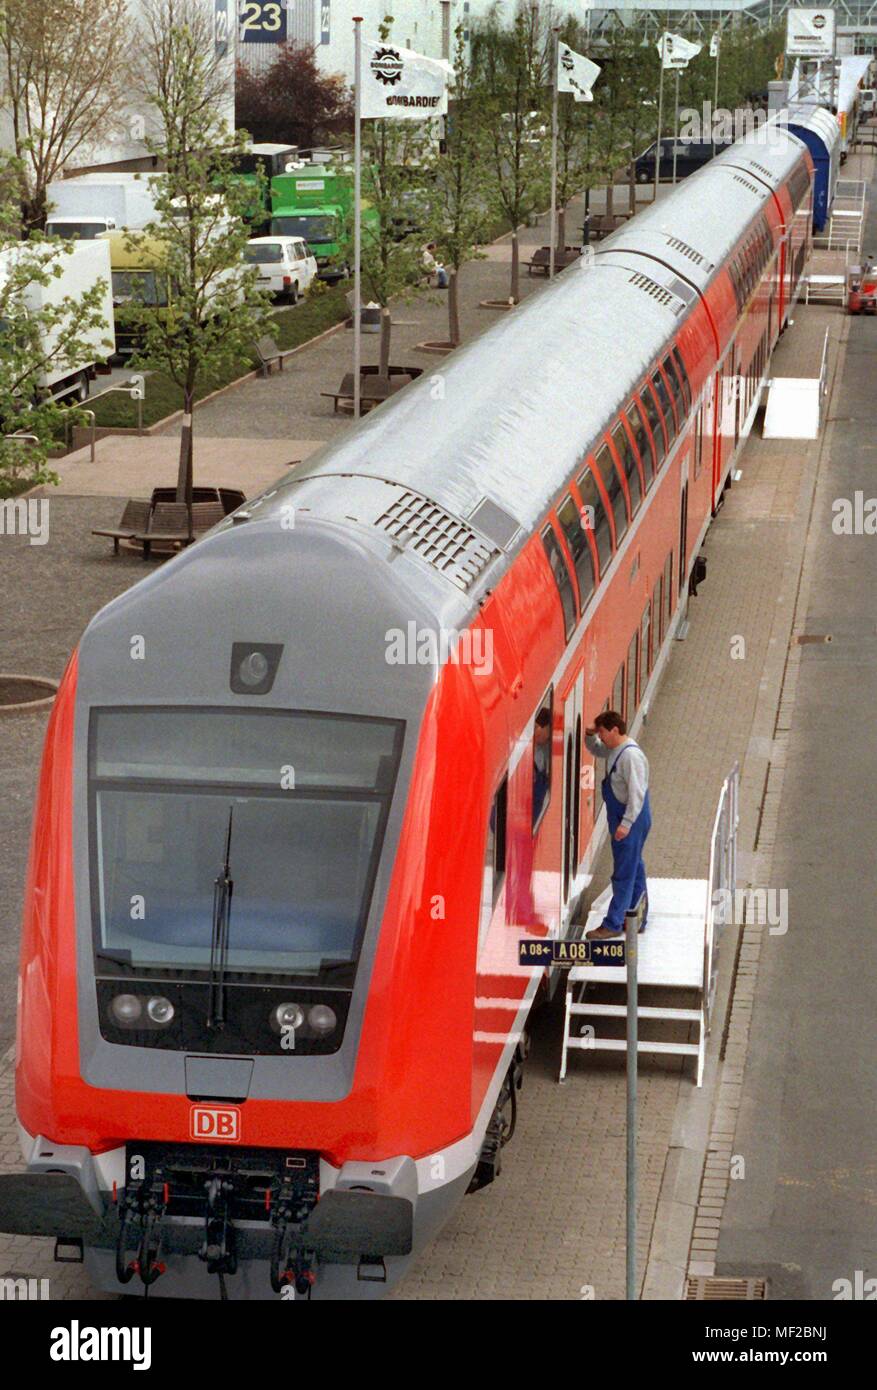 On April 18, 1999, a 27-meter-long double-decker control car will be one of  the longest exhibits of the specialist exhibition Rail Technology, which  will be shown at the Hannover Messe 1999 from